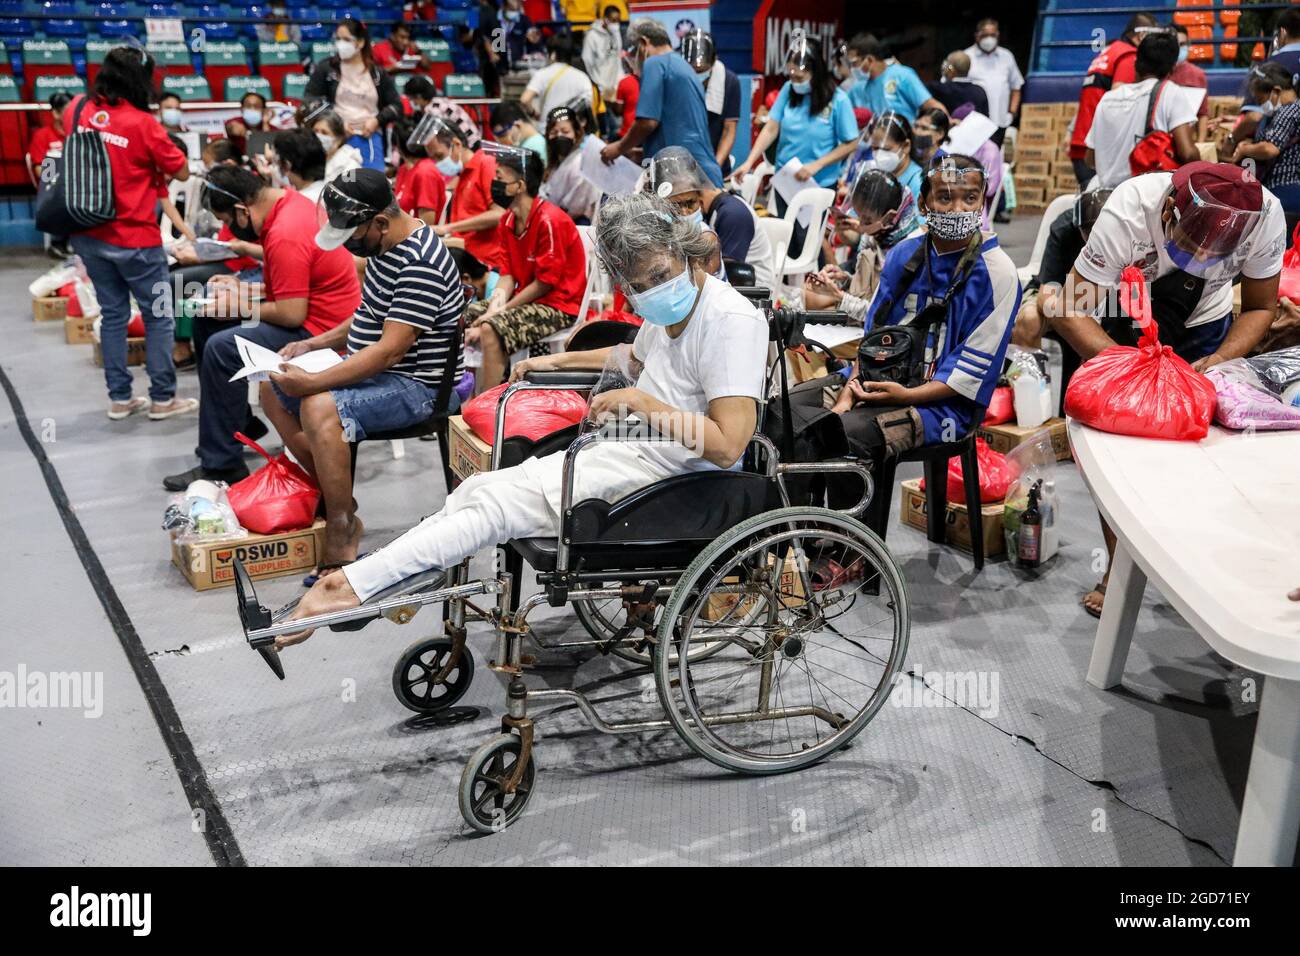 Persons with disabilities receiving a dose of the Johnson & Johnson COVID-19 vaccine at the Filoil Flying-V Arena in San Juan City. Philippine officials said a local transmission of the highly contagious delta variant of the COVID-19 virus has been detected in the country and announced tighter quarantine restrictions in the capital and a ban on the entry of travelers from hard-hit Malaysia and Thailand. Metro Manila, Philippines. Stock Photo